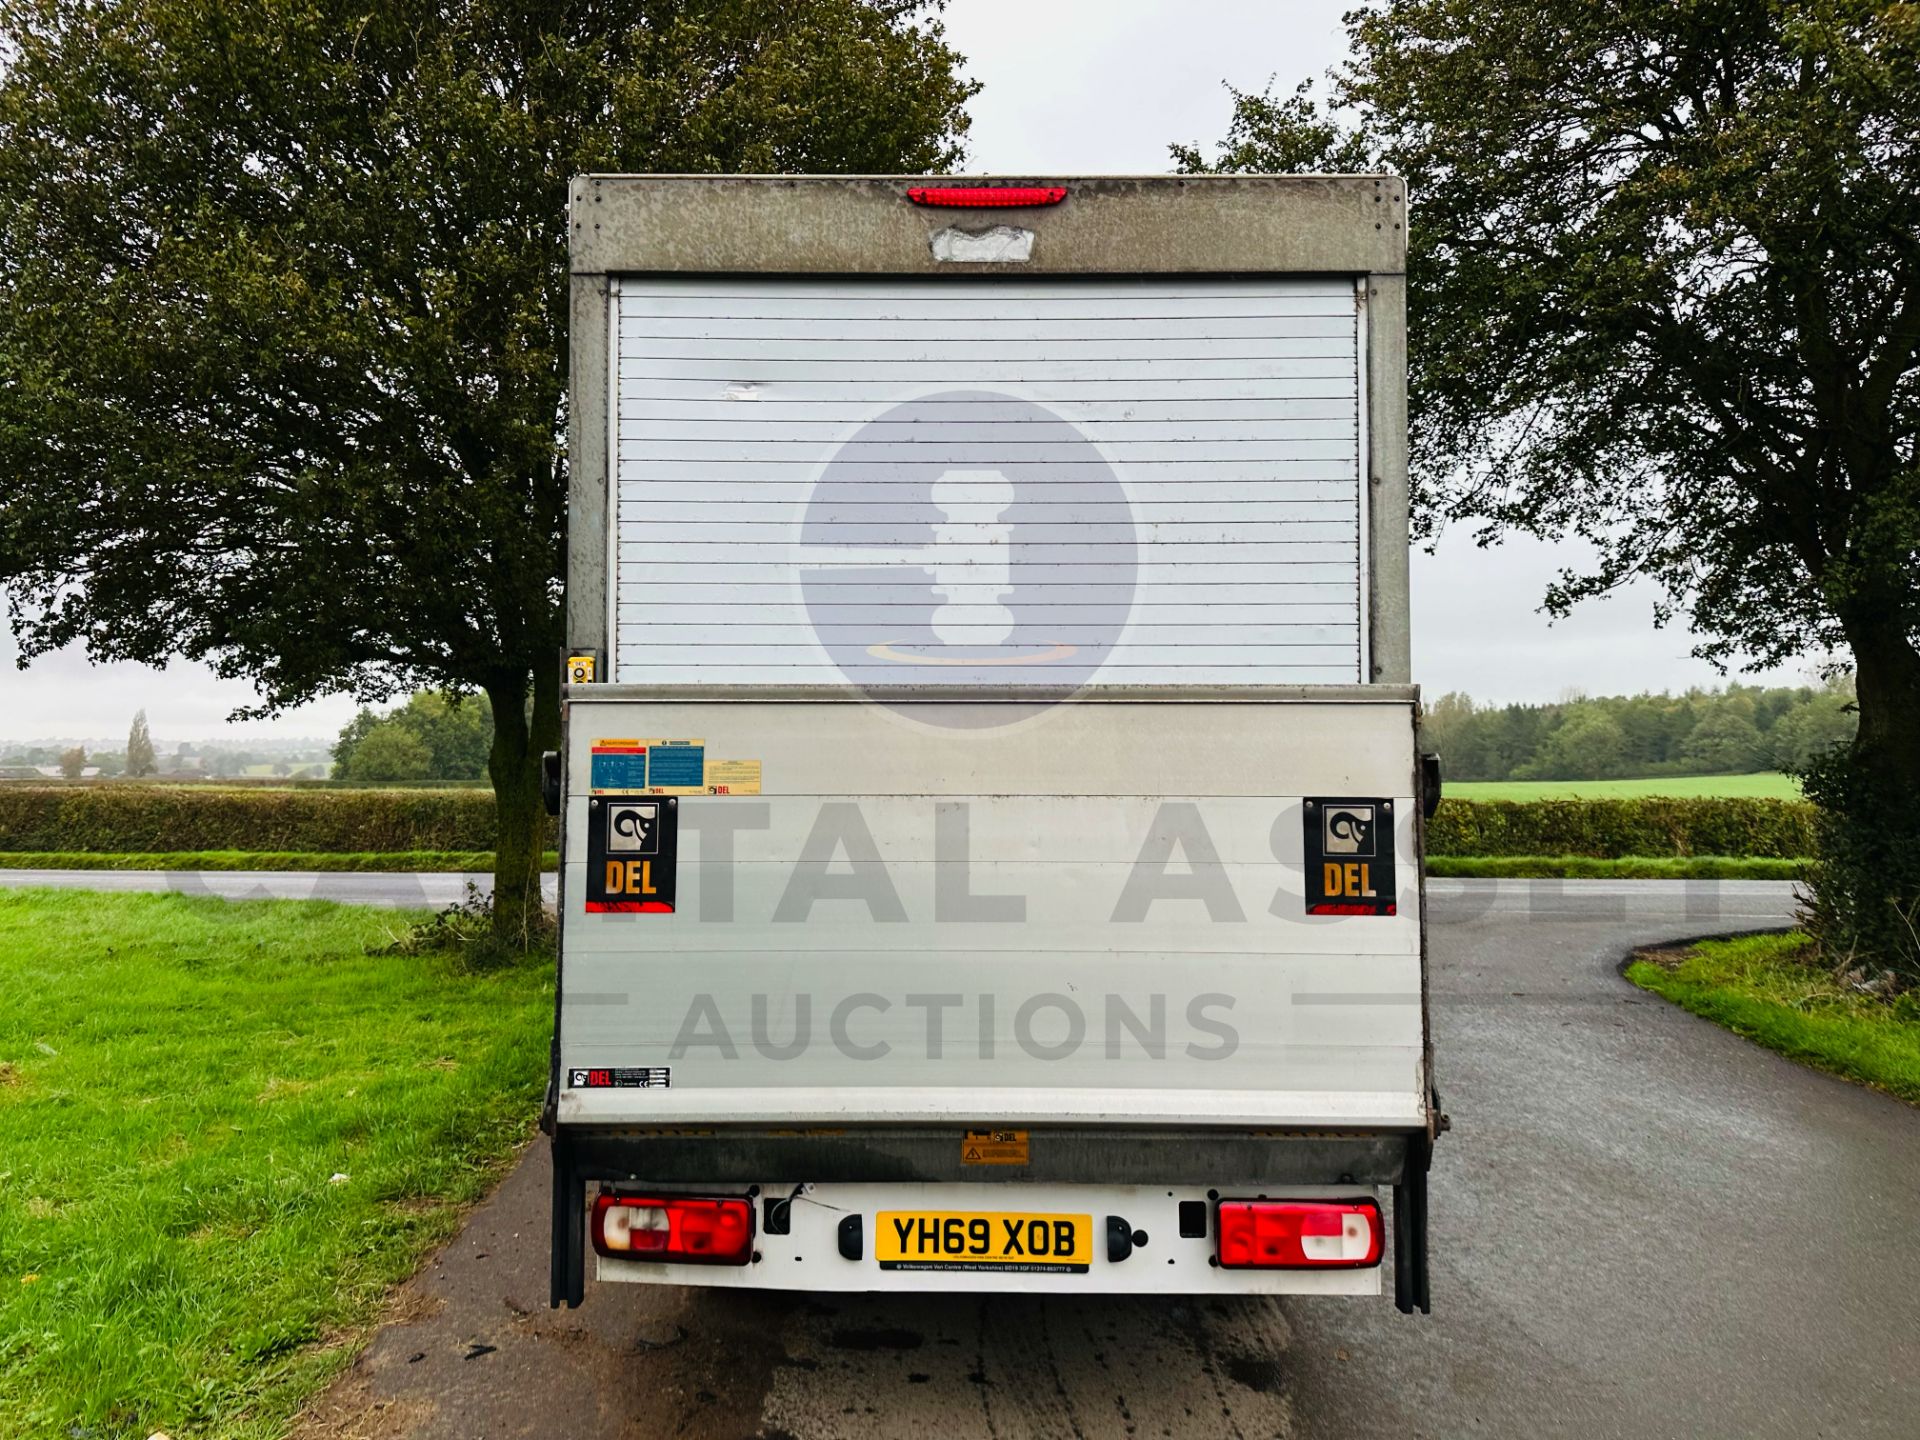 (On Sale) VOLKSWAGEN CRAFTER CR35 *LWB - CURTAIN SIDE* (69 REG - EURO 6) 2.0 TDI *EURO 6* (1 OWNER) - Image 9 of 26